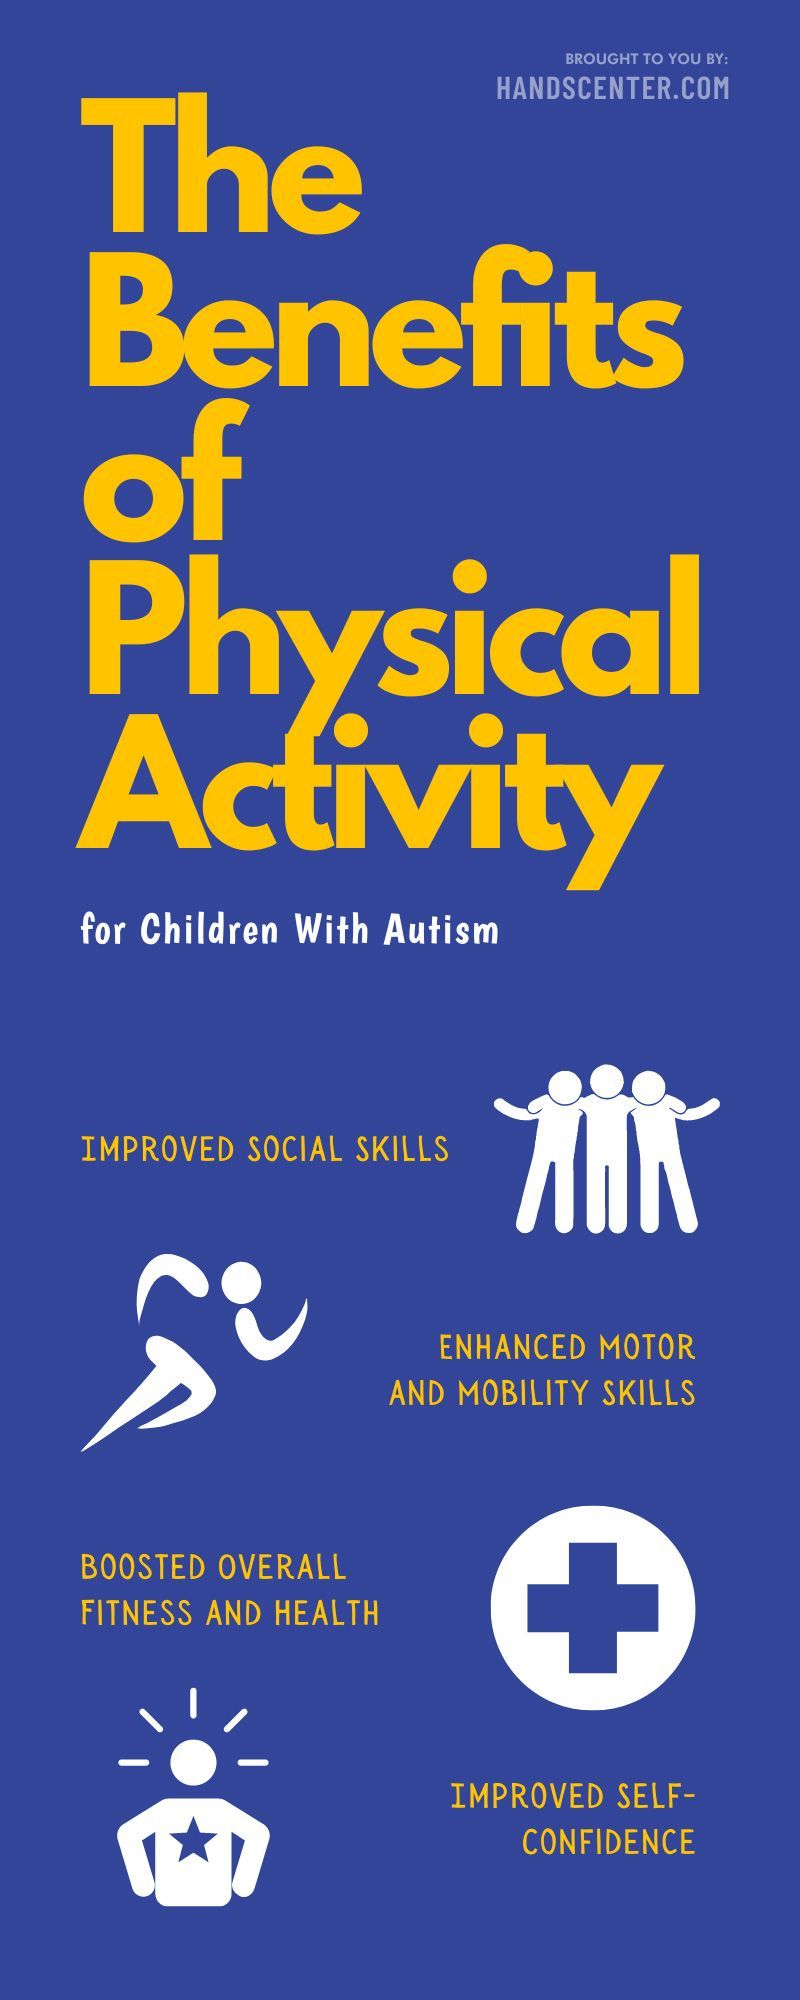 The Benefits of Physical Activity for Children With Autism